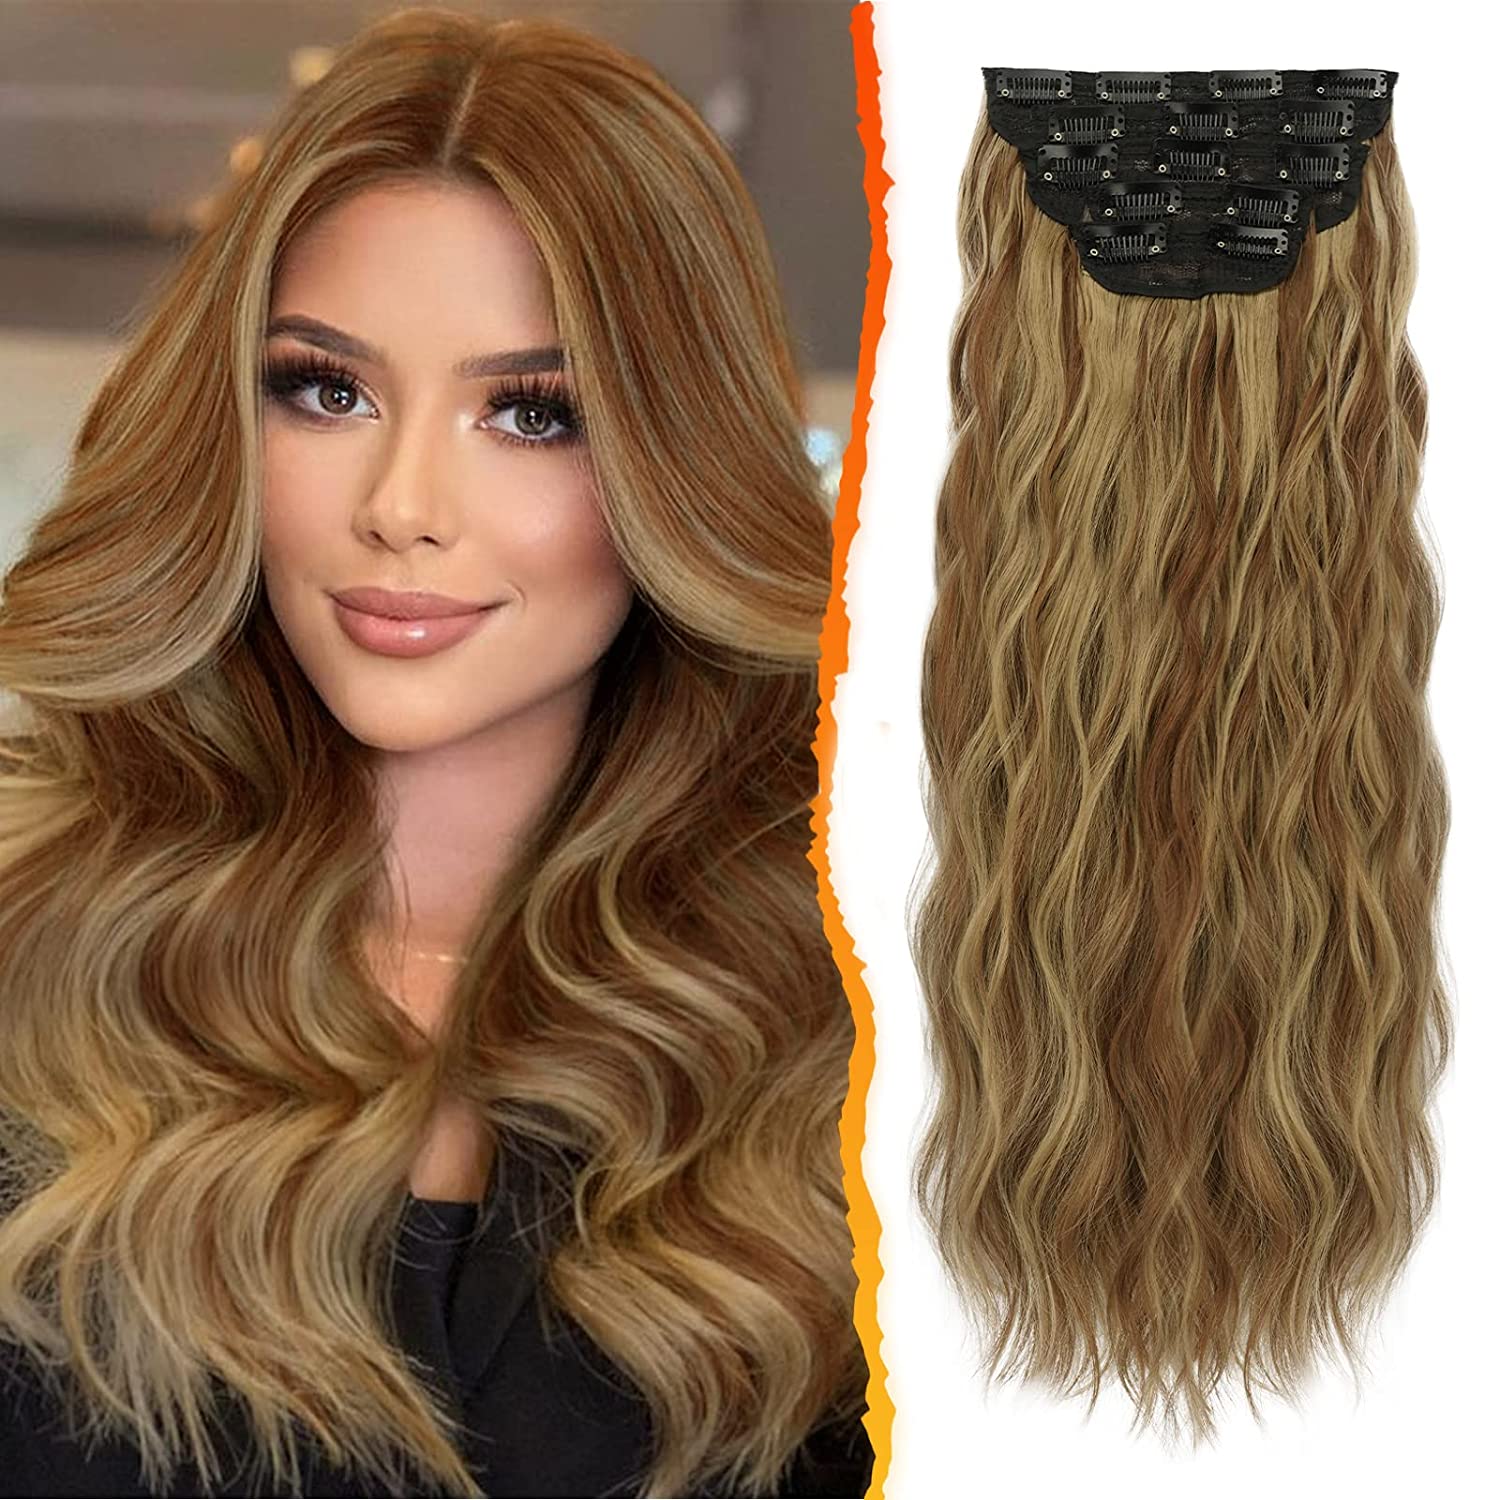 Clip in Hair Extensions, 5PCS Long Wavy Copper Chestnut Hair